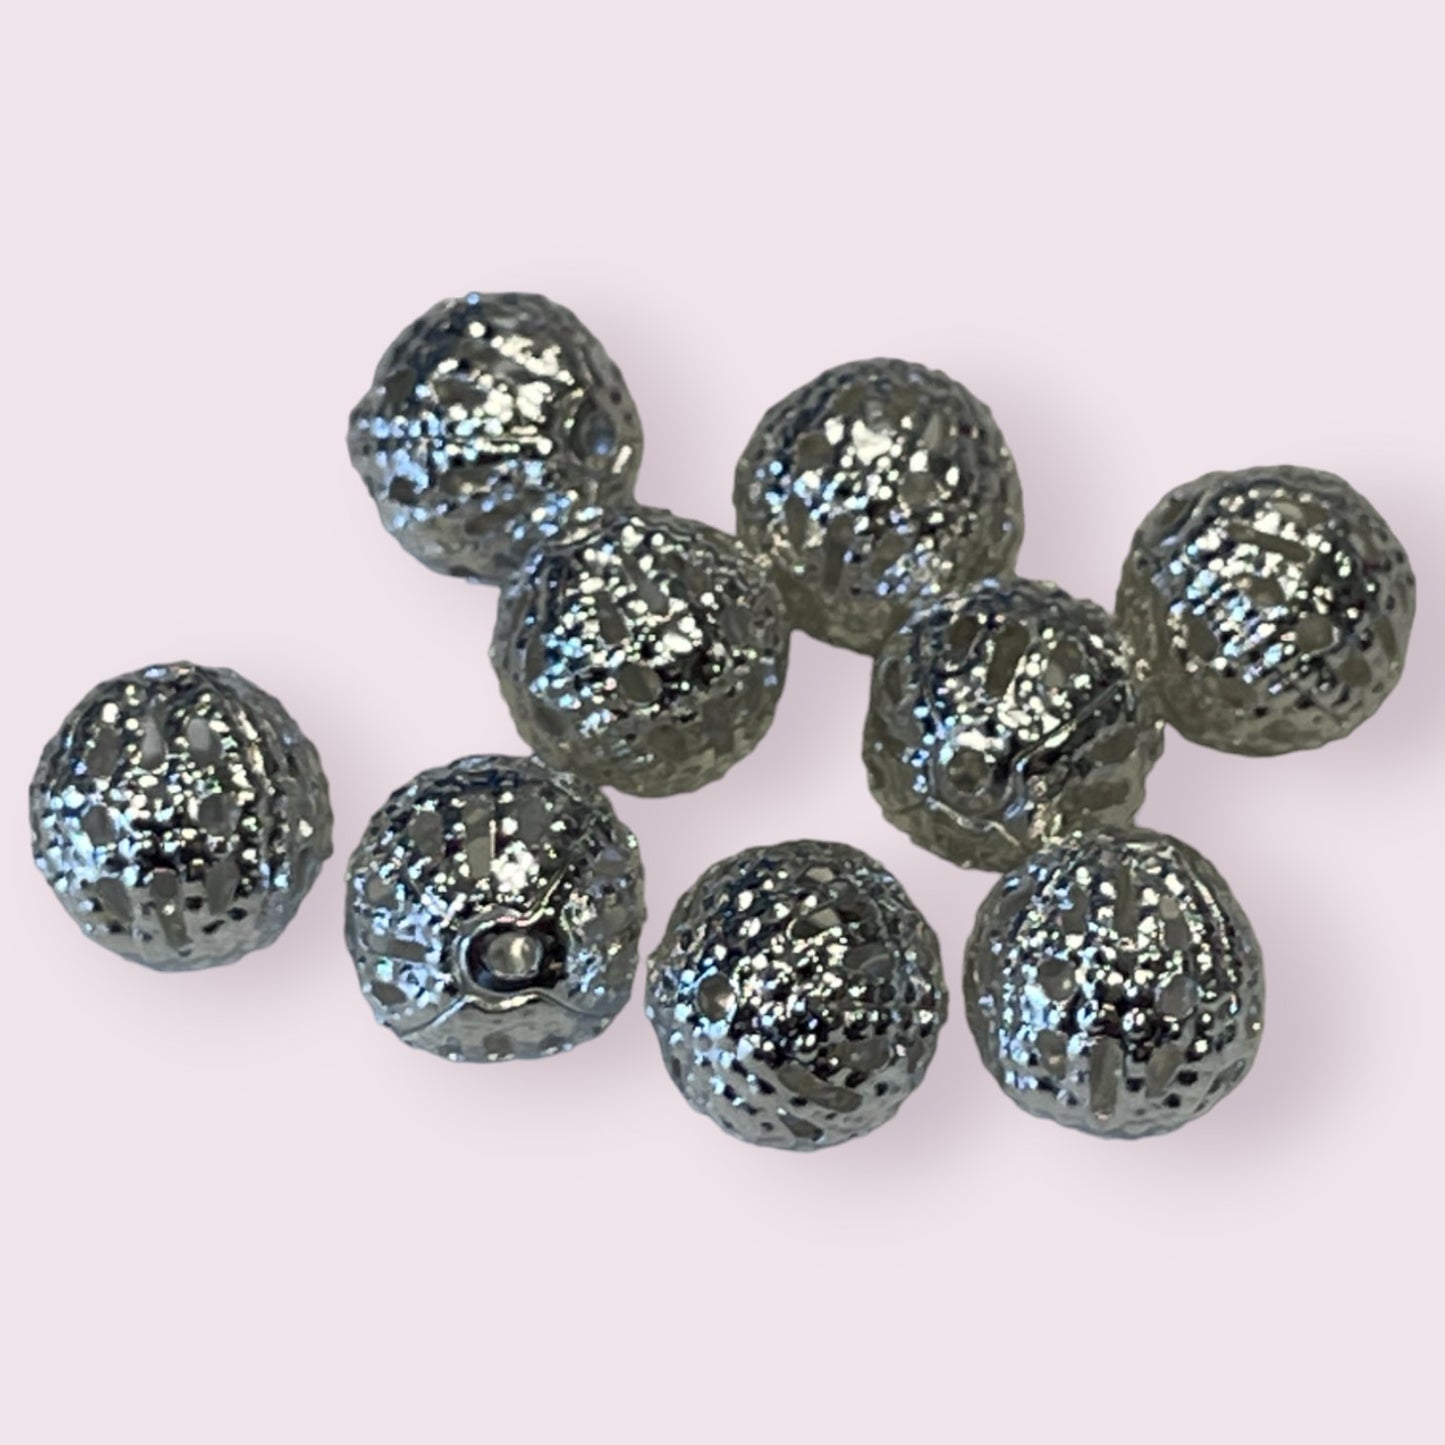 Silver Filigree Beads - metal base - 6mm, 8mm and 10mm - 50 pack